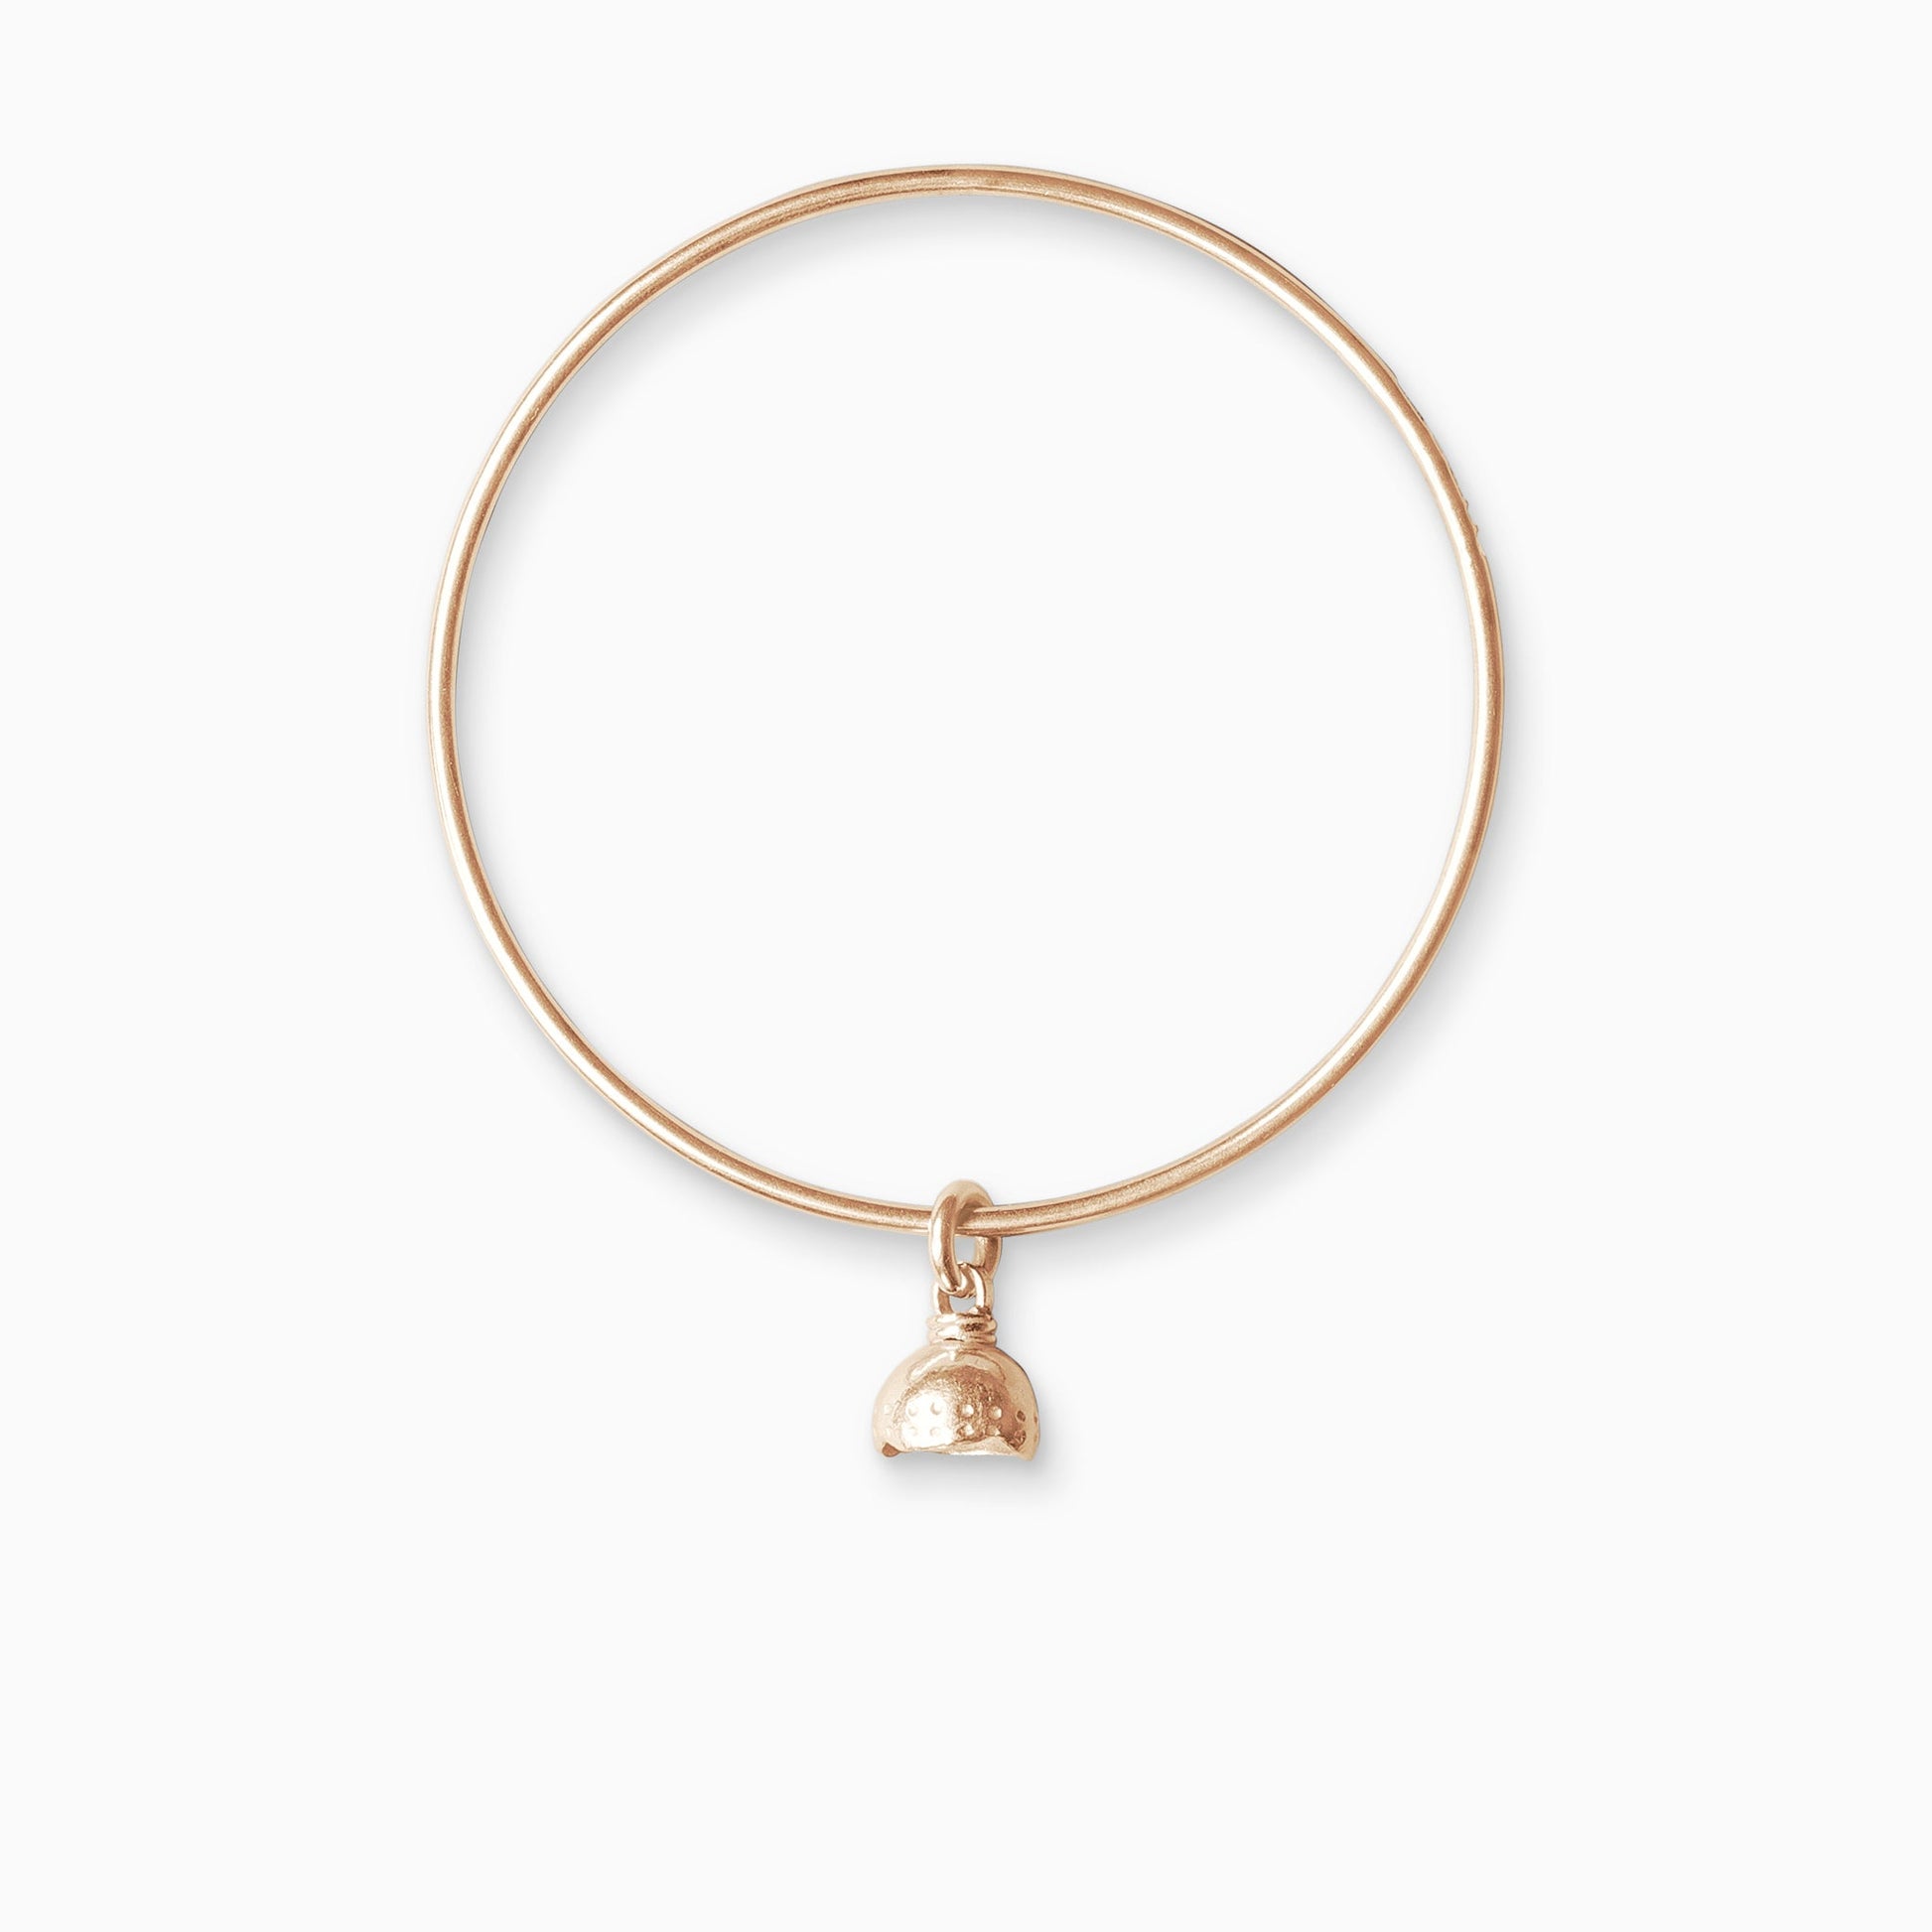 An 18ct Fairtrade rose gold bell shaped charm freely moving on a round wire bangle. Charm 11mm. Bangle 63mm inside diameter x 2mm round wire.